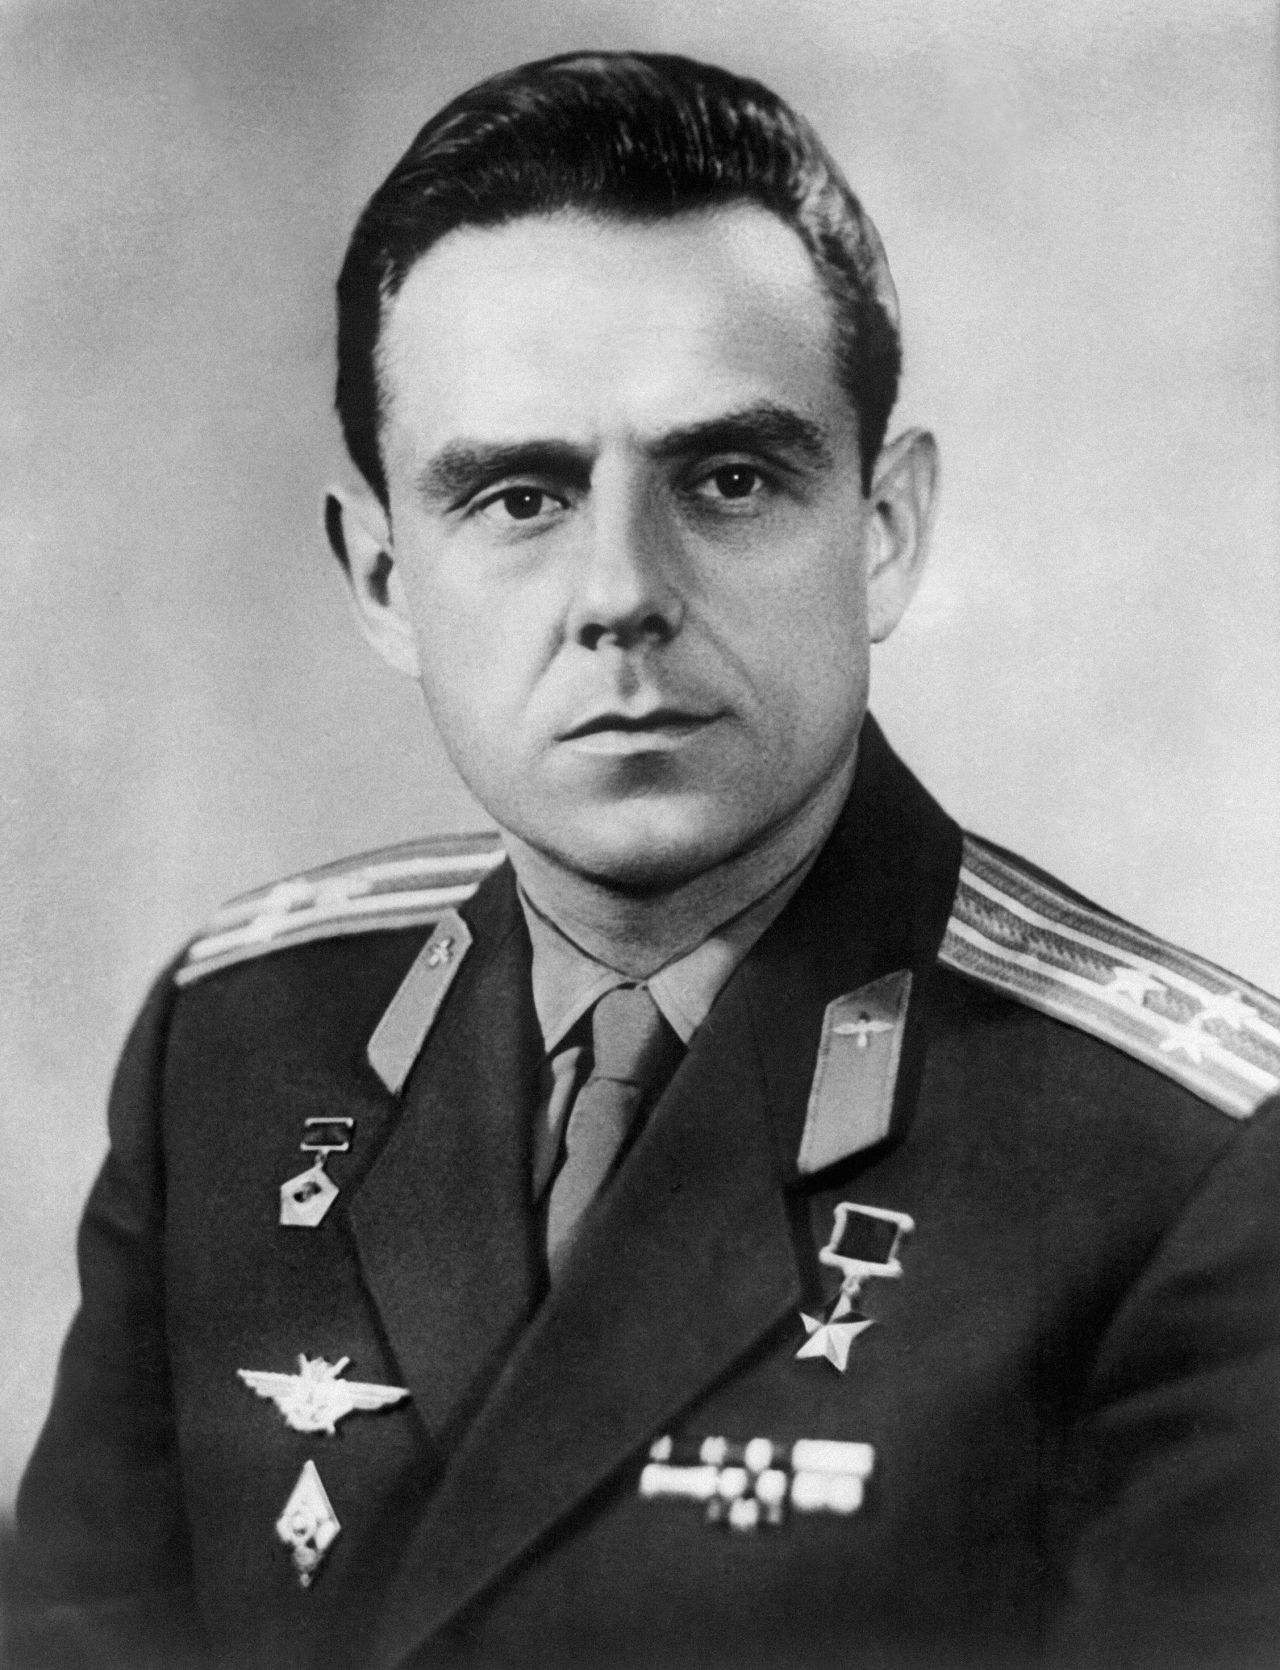 Soviet cosmonaut Vladimir Komarov was the first human to die during a space mission. He died when the Soyuz 1 spacecraft crashed during its return to Earth on April 23, 1967. It was his second spaceflight.